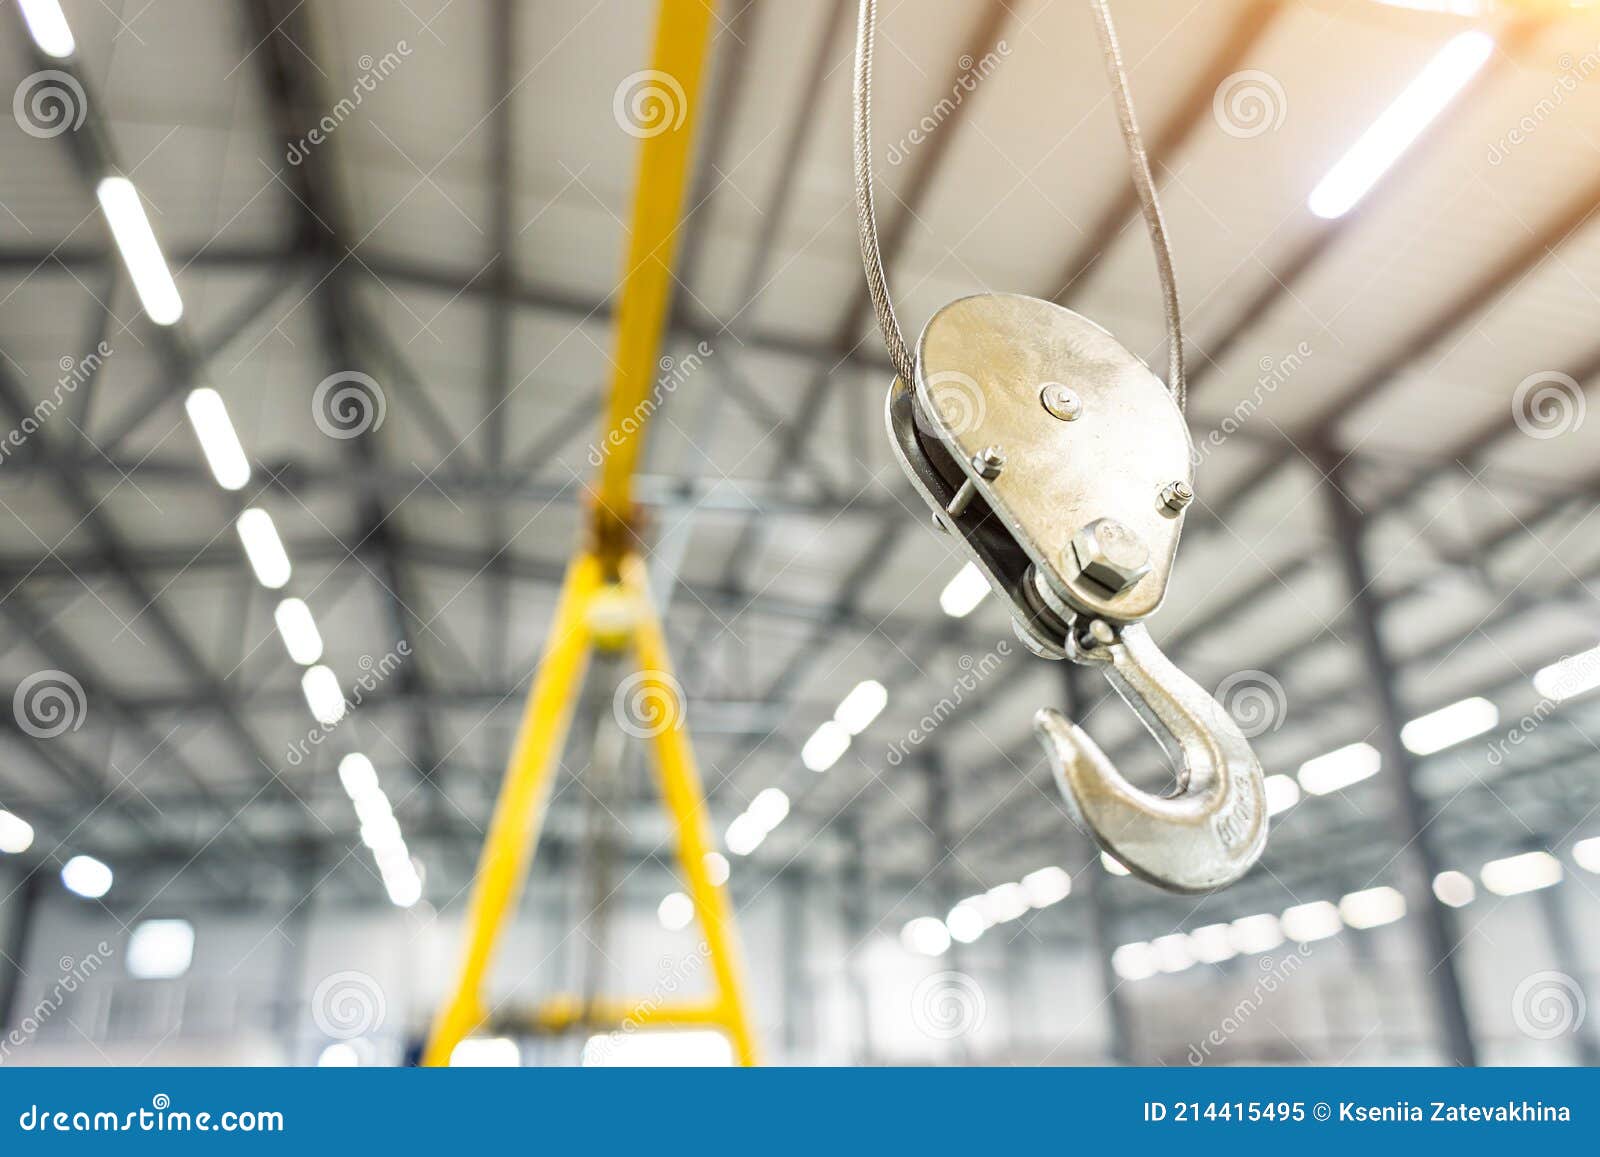 Close Up Swivel Electric Crane Hook for Overhead Crane in the Workshop or  Factory Stock Image - Image of lifting, crane: 214415495